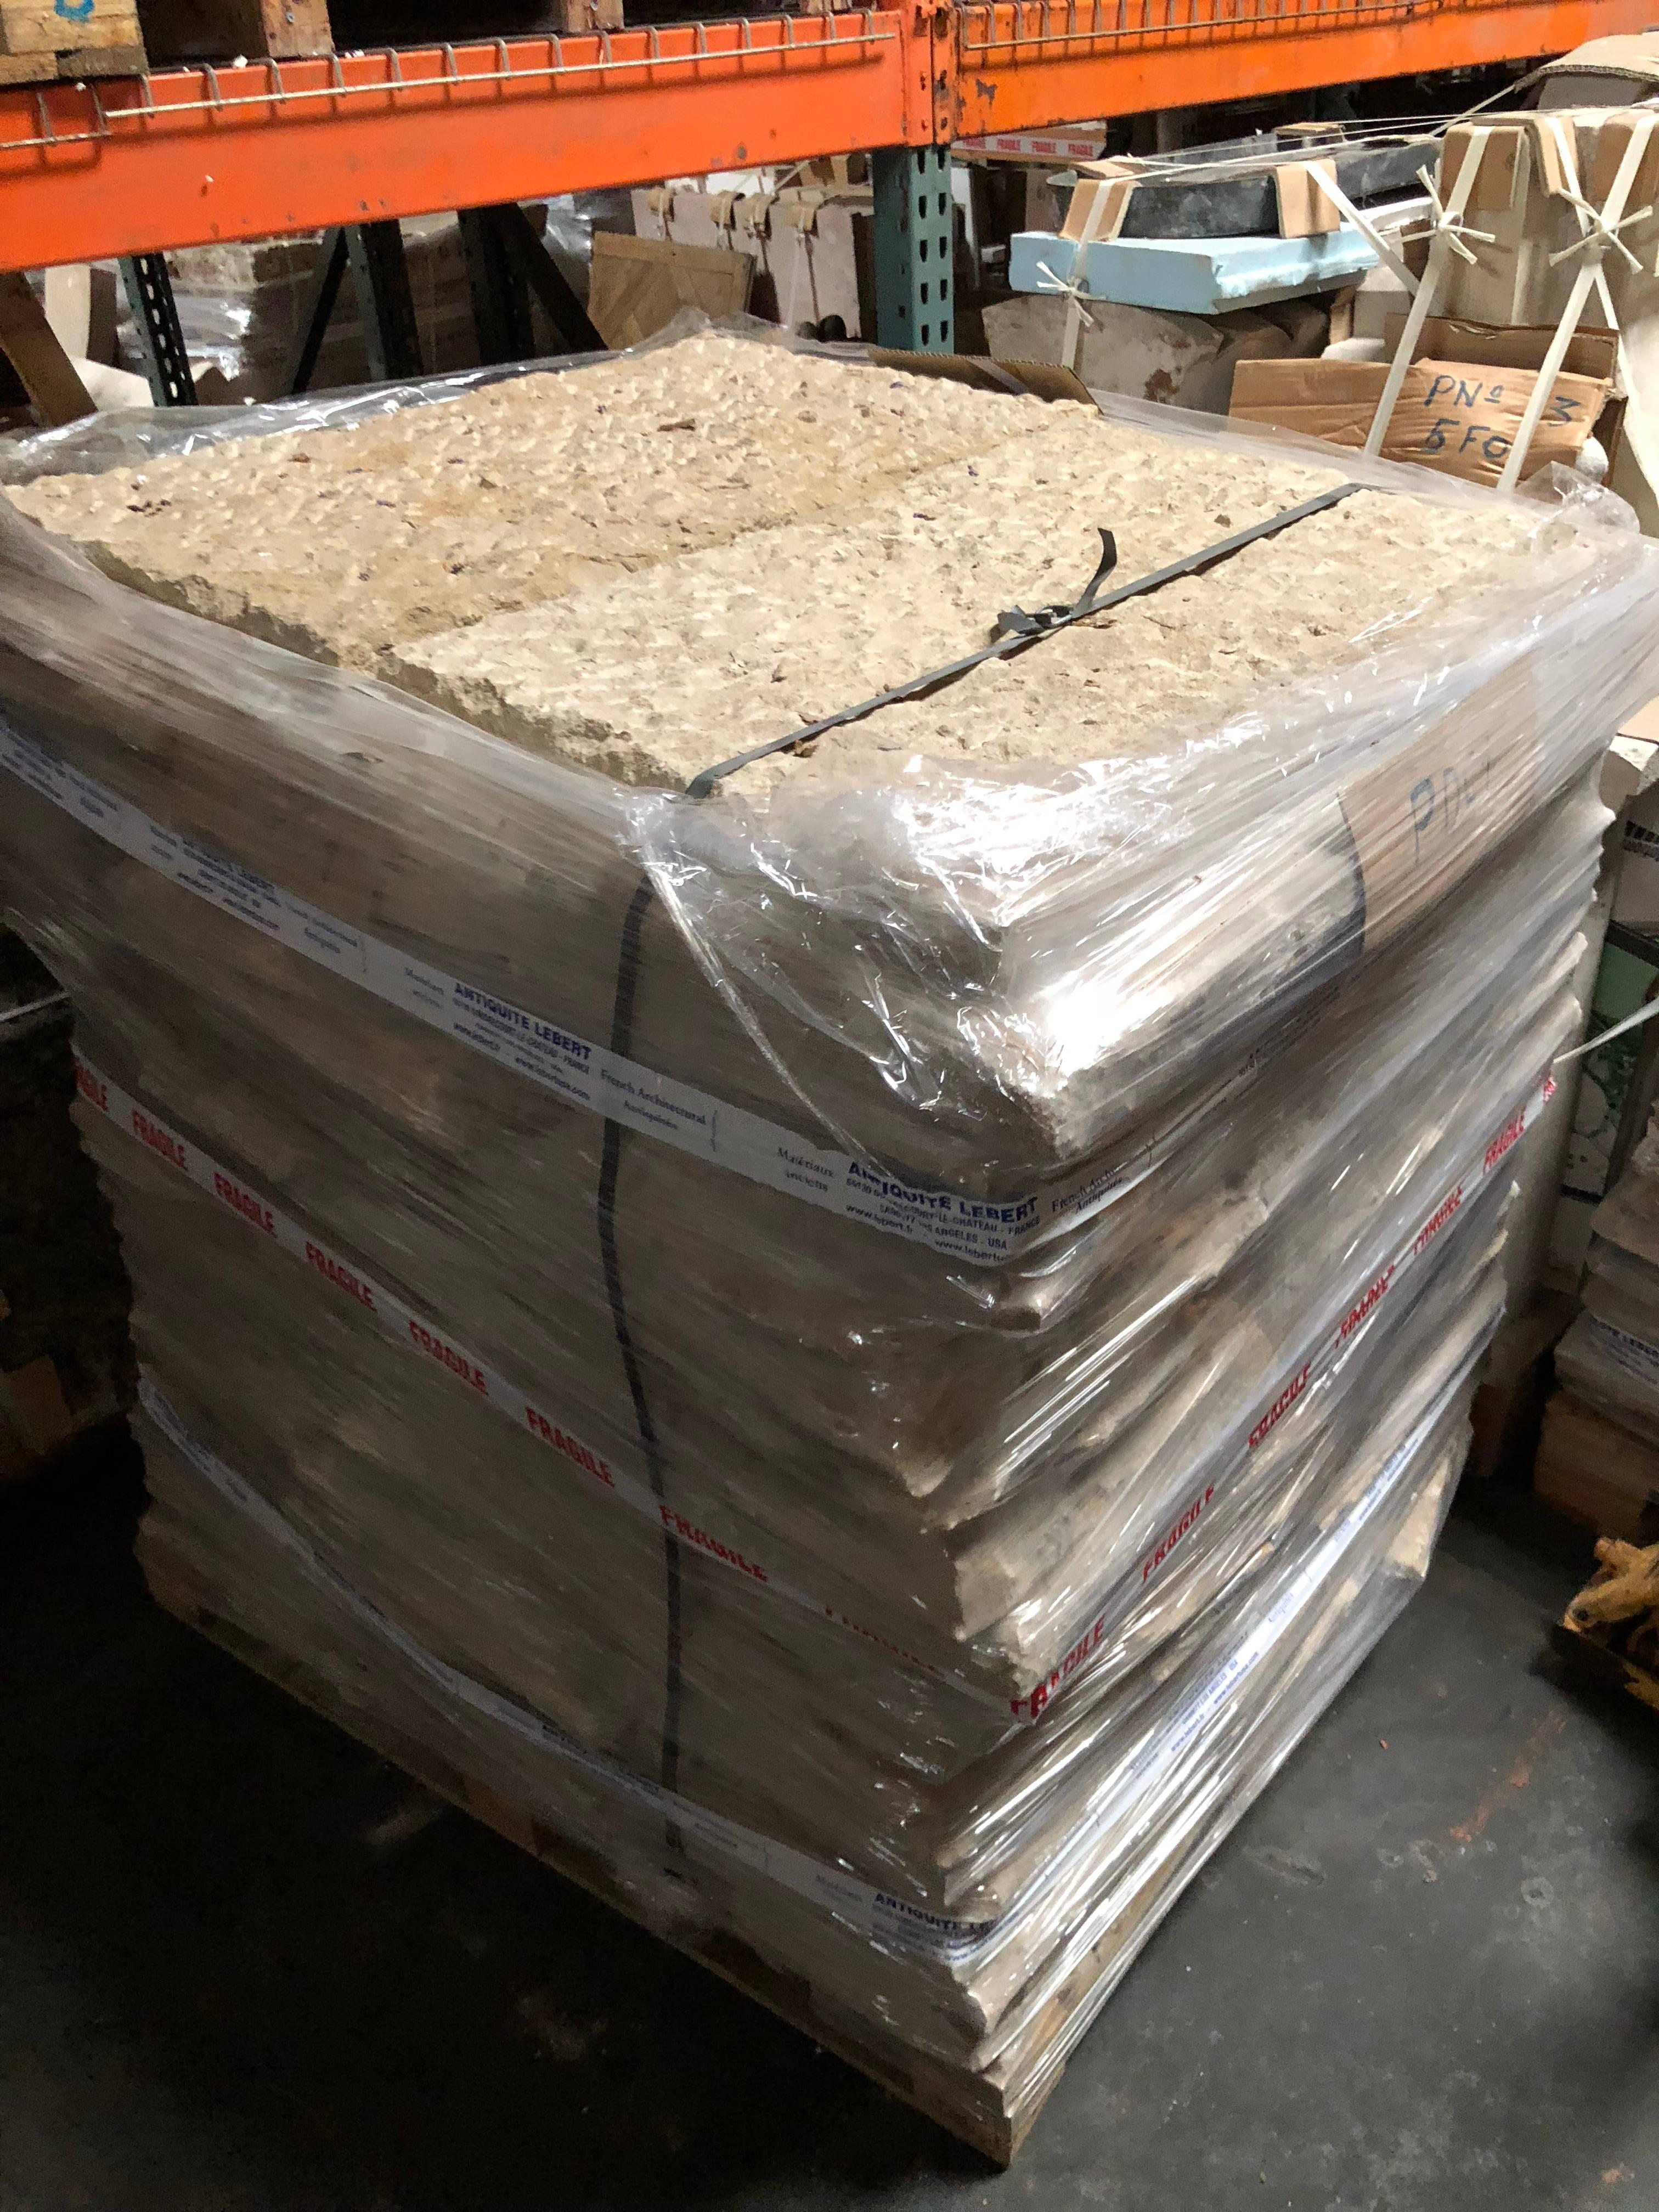 Original and authentic French antique terra cotta flooring, hexagonal, square and parrefeuille available (price per square foot).
Also 18th century dalles de Bourgogne, limestone, solid wood oak floors. Ready for installation. Available right now